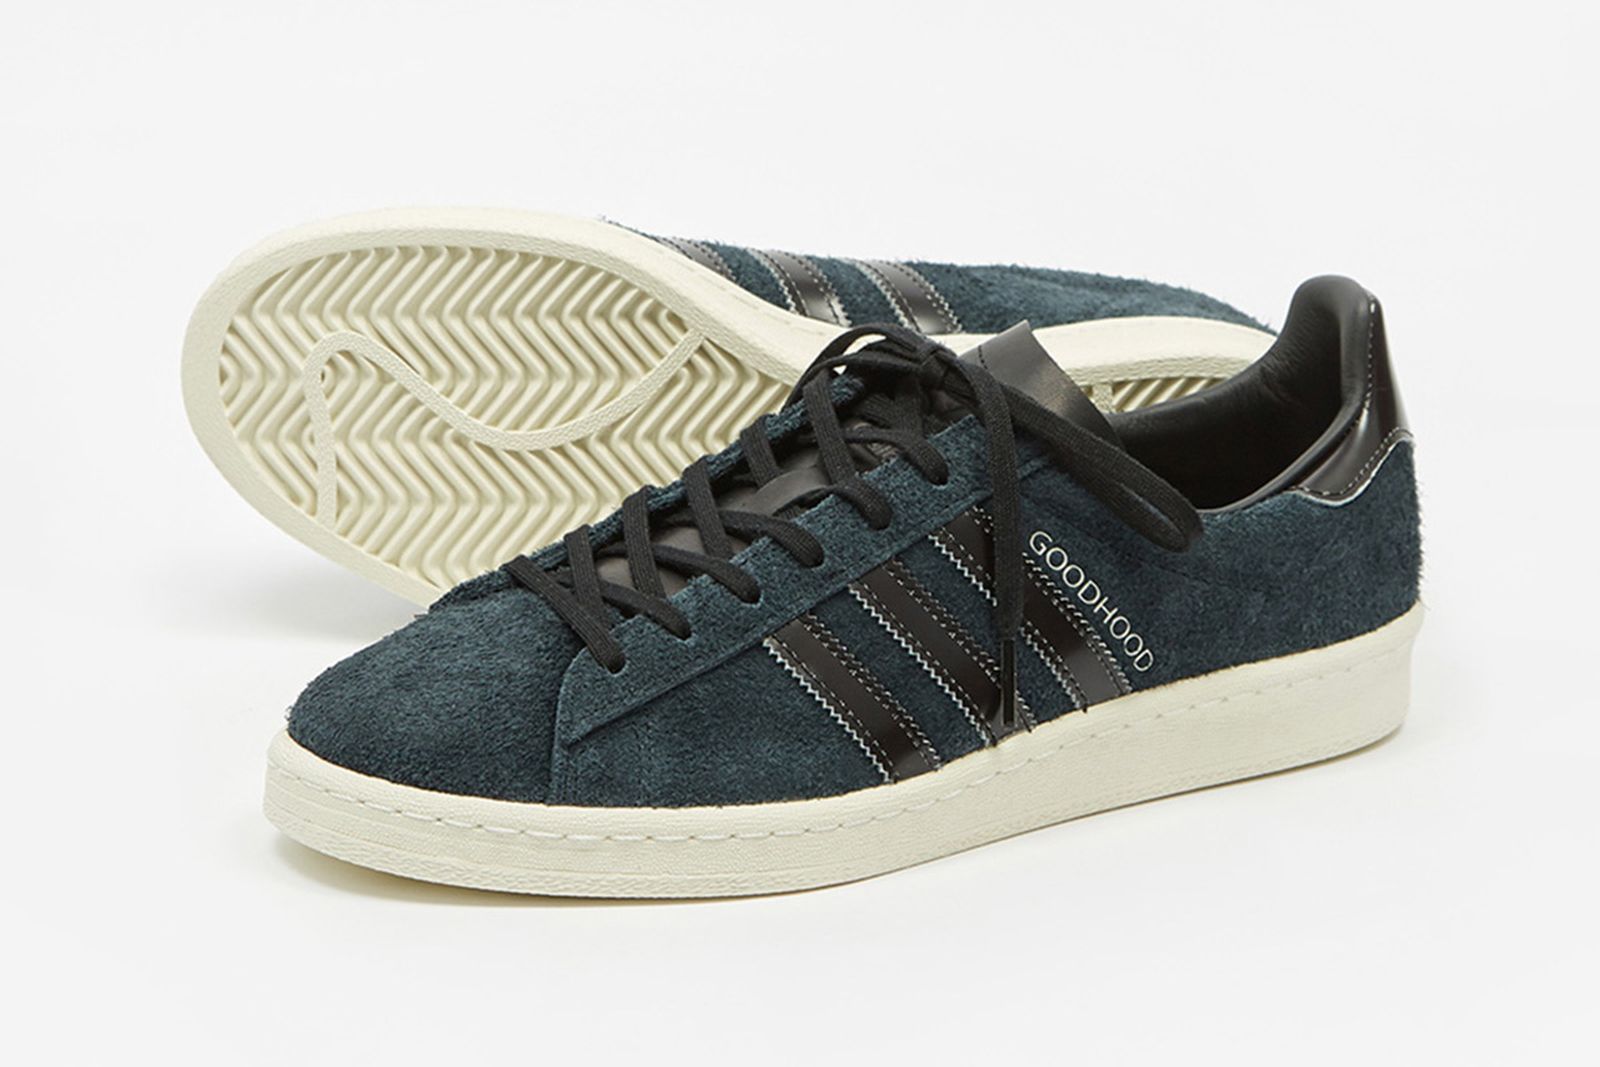 Goodhood x adidas Campus 80s: Official Images & Release Info